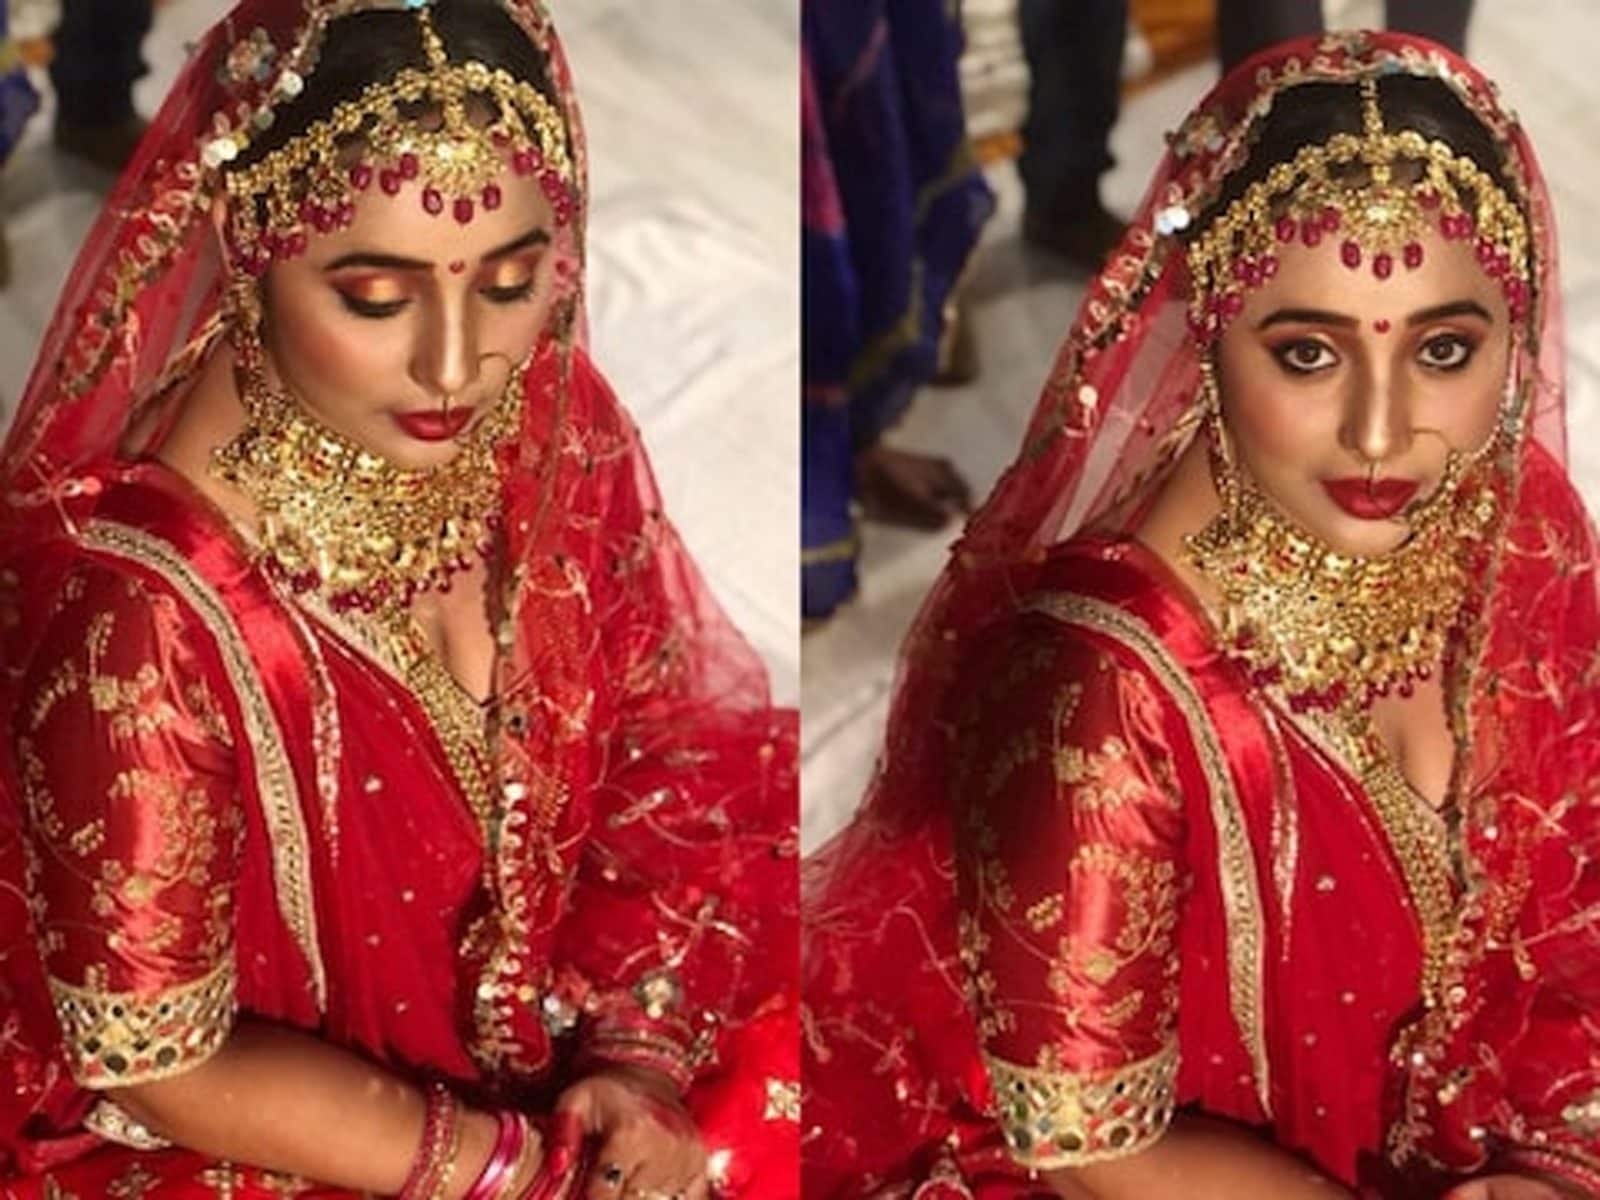 Rani Chatterjee Ka Xxx - Rani Chatterjee Shares Her Bridal Look From Her Upcoming Movie, Fans Go Wow  - News18